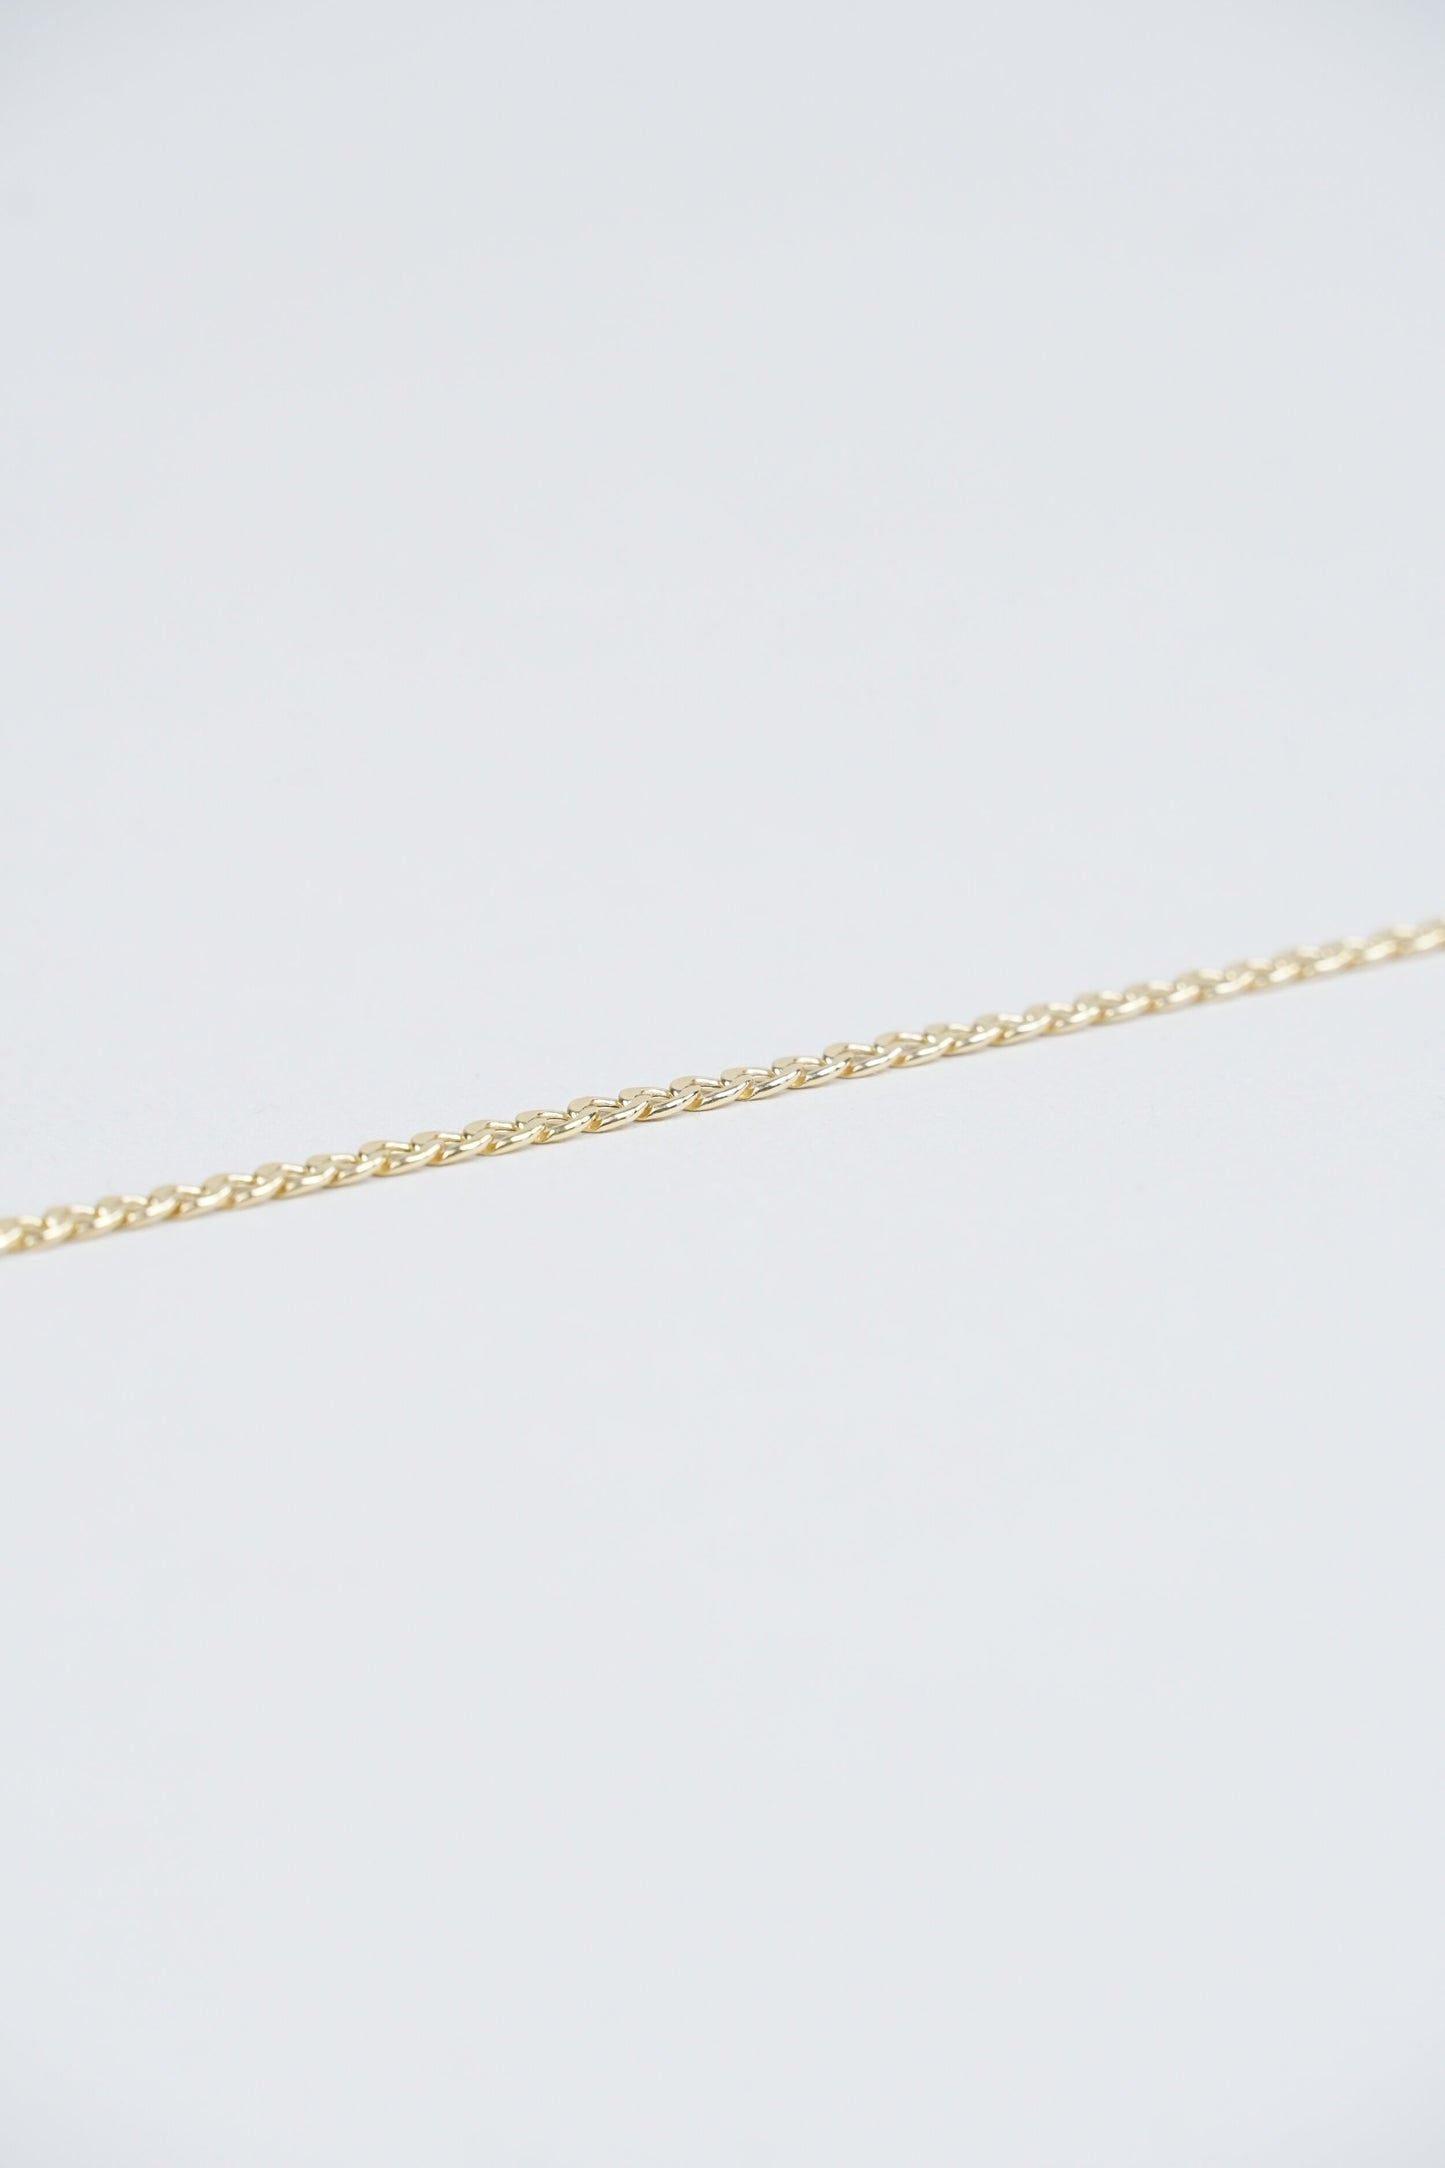 24" Curb Link Necklace - 14k Yellow Gold